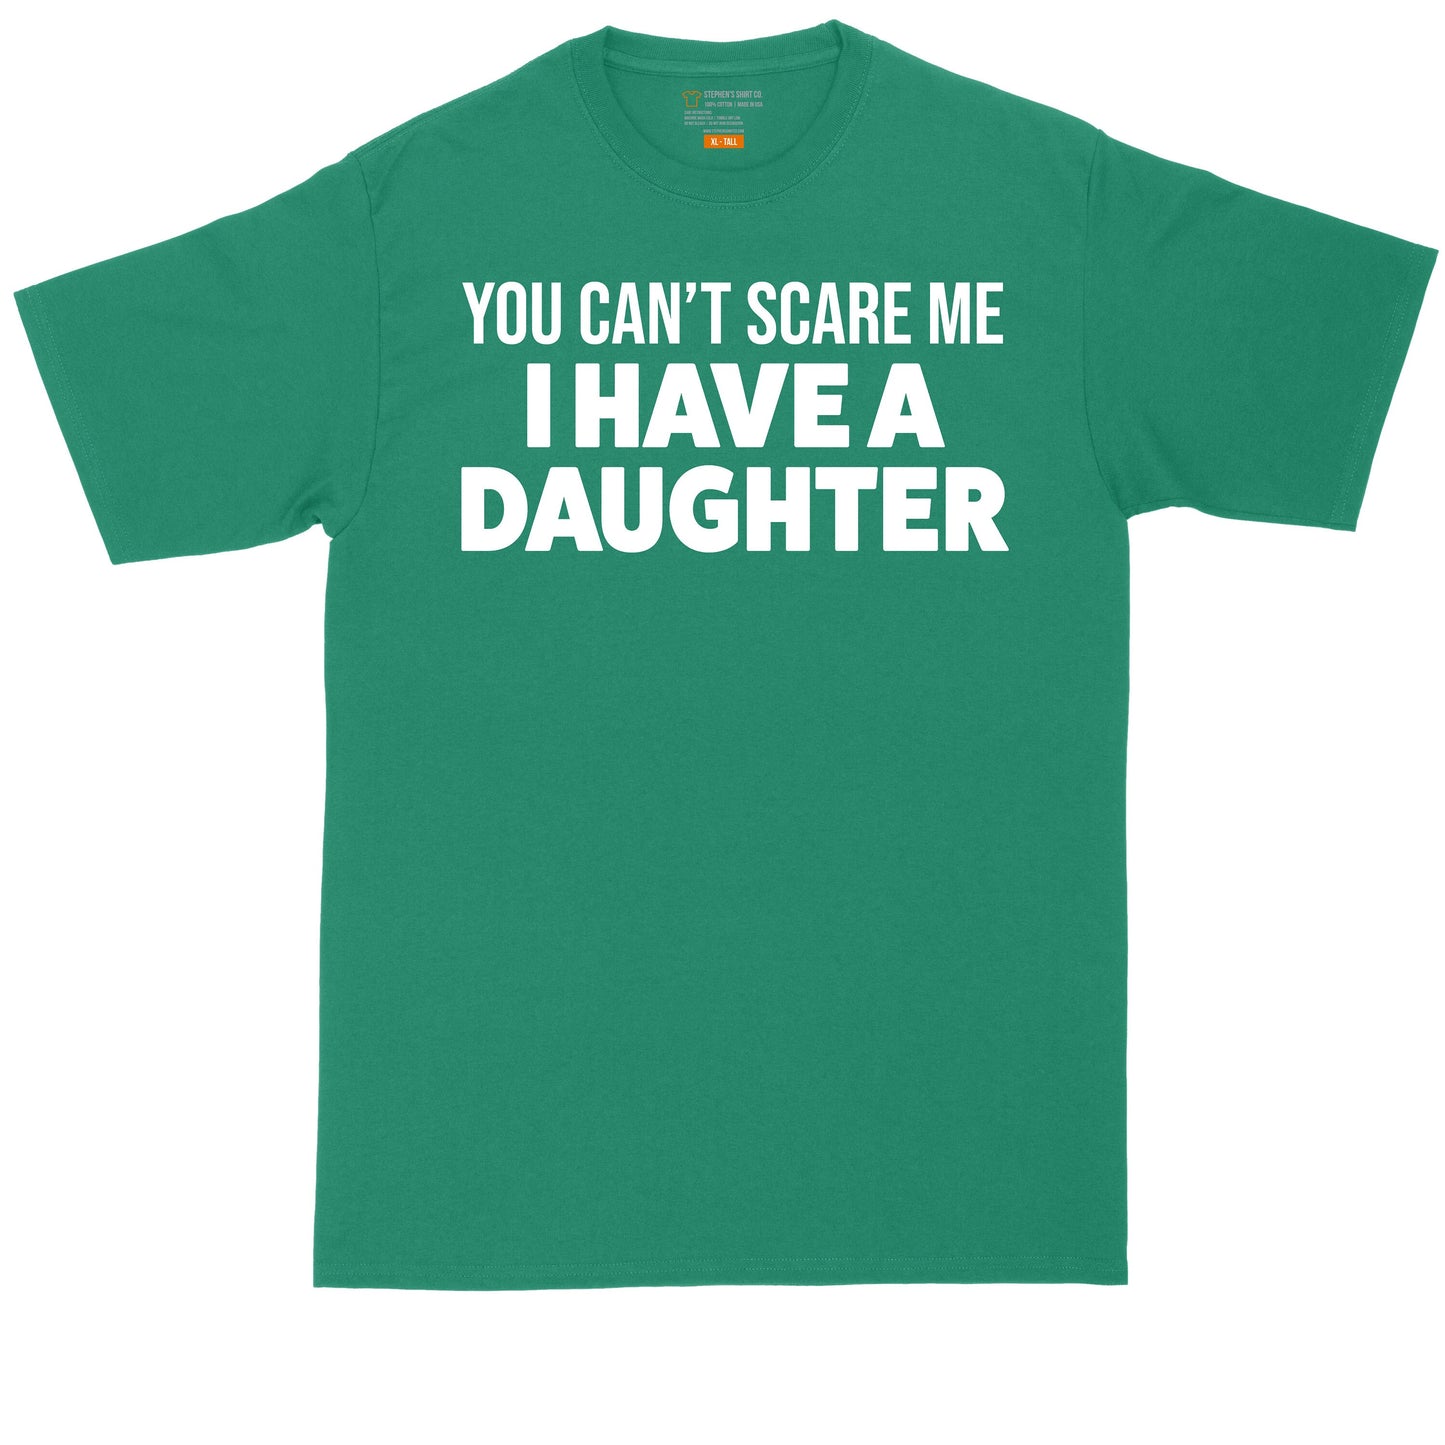 You Can't Scare Me I Have a Daughter | Mens Big & Tall T-Shirt